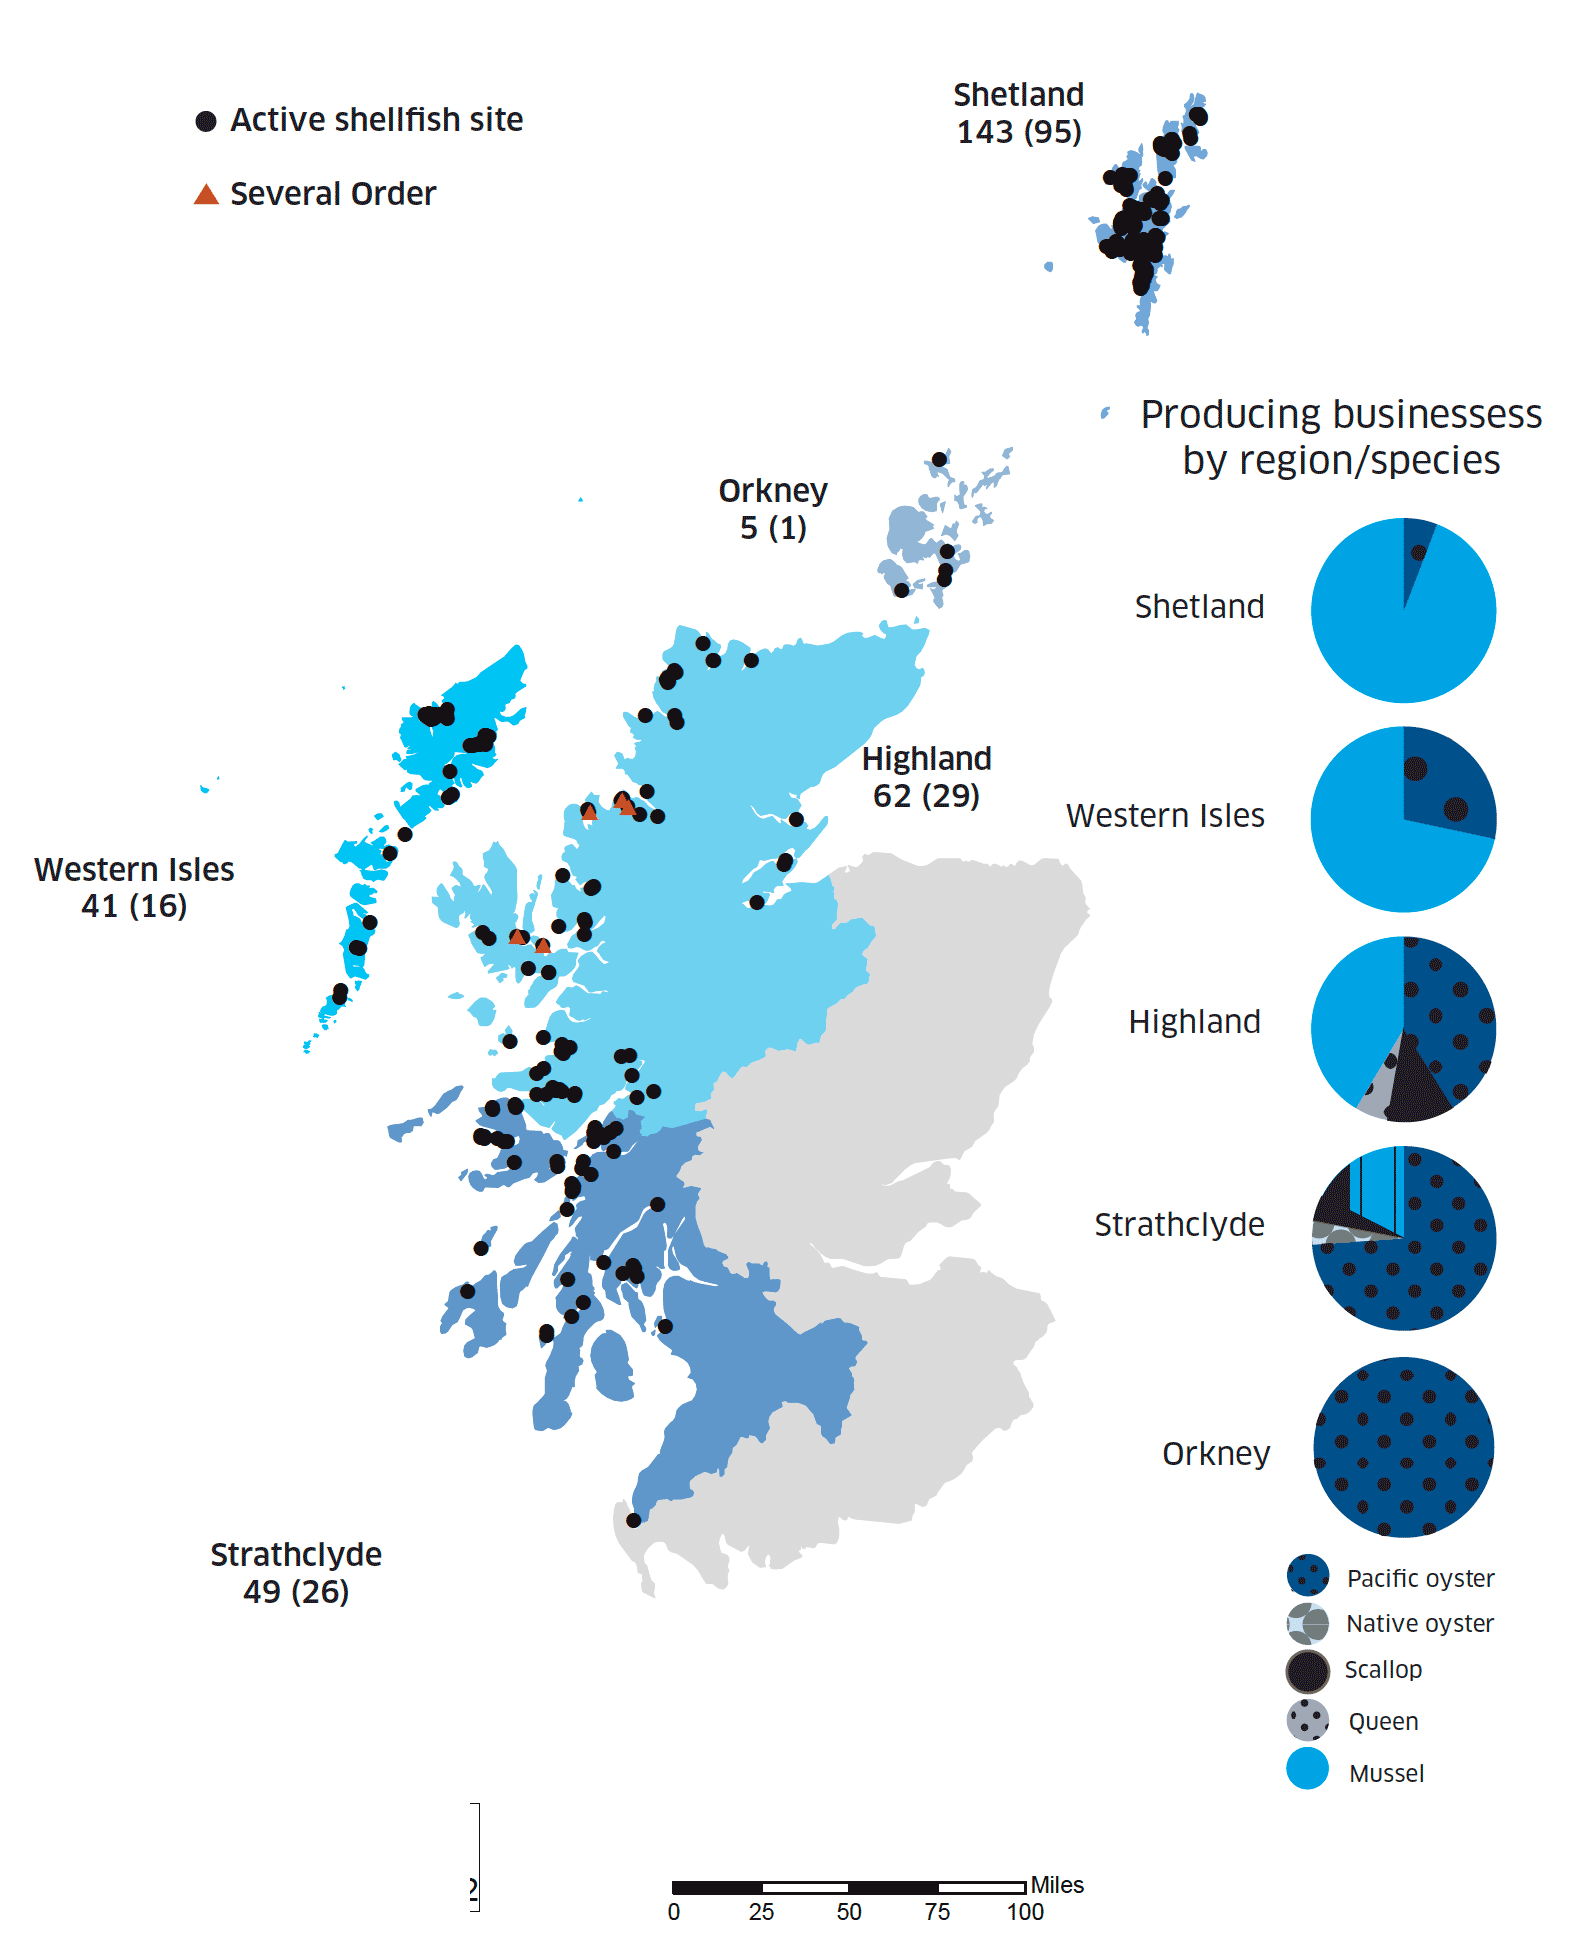 This is a map showing the distribution of active shellfish sites in Scotland in 2022. The map is split into five areas: Shetland, Orkney, Western Isles, Highland and Strathclyde and has black dots showing where each site is on the map. There are also five red triangles showing the location of the Several Order which are currently in place for scallop fisheries, these are all located in the Highland region. Pie charts show number of producing businesses by region and species.